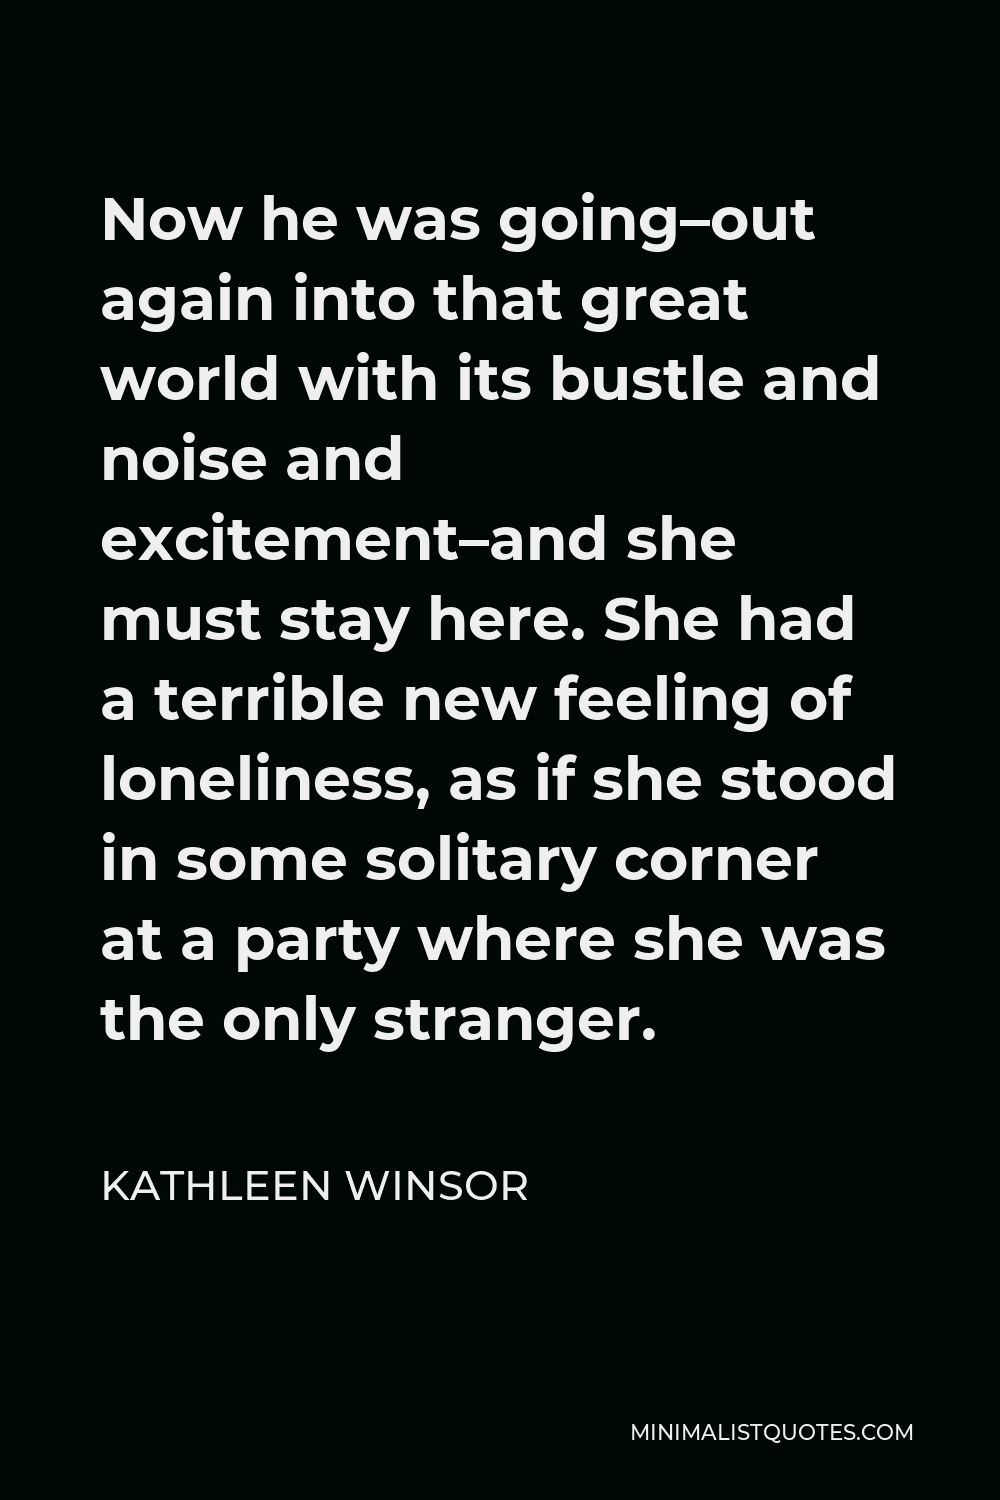 Kathleen Winsor Quote - Now he was going–out again into that great world with its bustle and noise and excitement–and she must stay here. She had a terrible new feeling of loneliness, as if she stood in some solitary corner at a party where she was the only stranger.